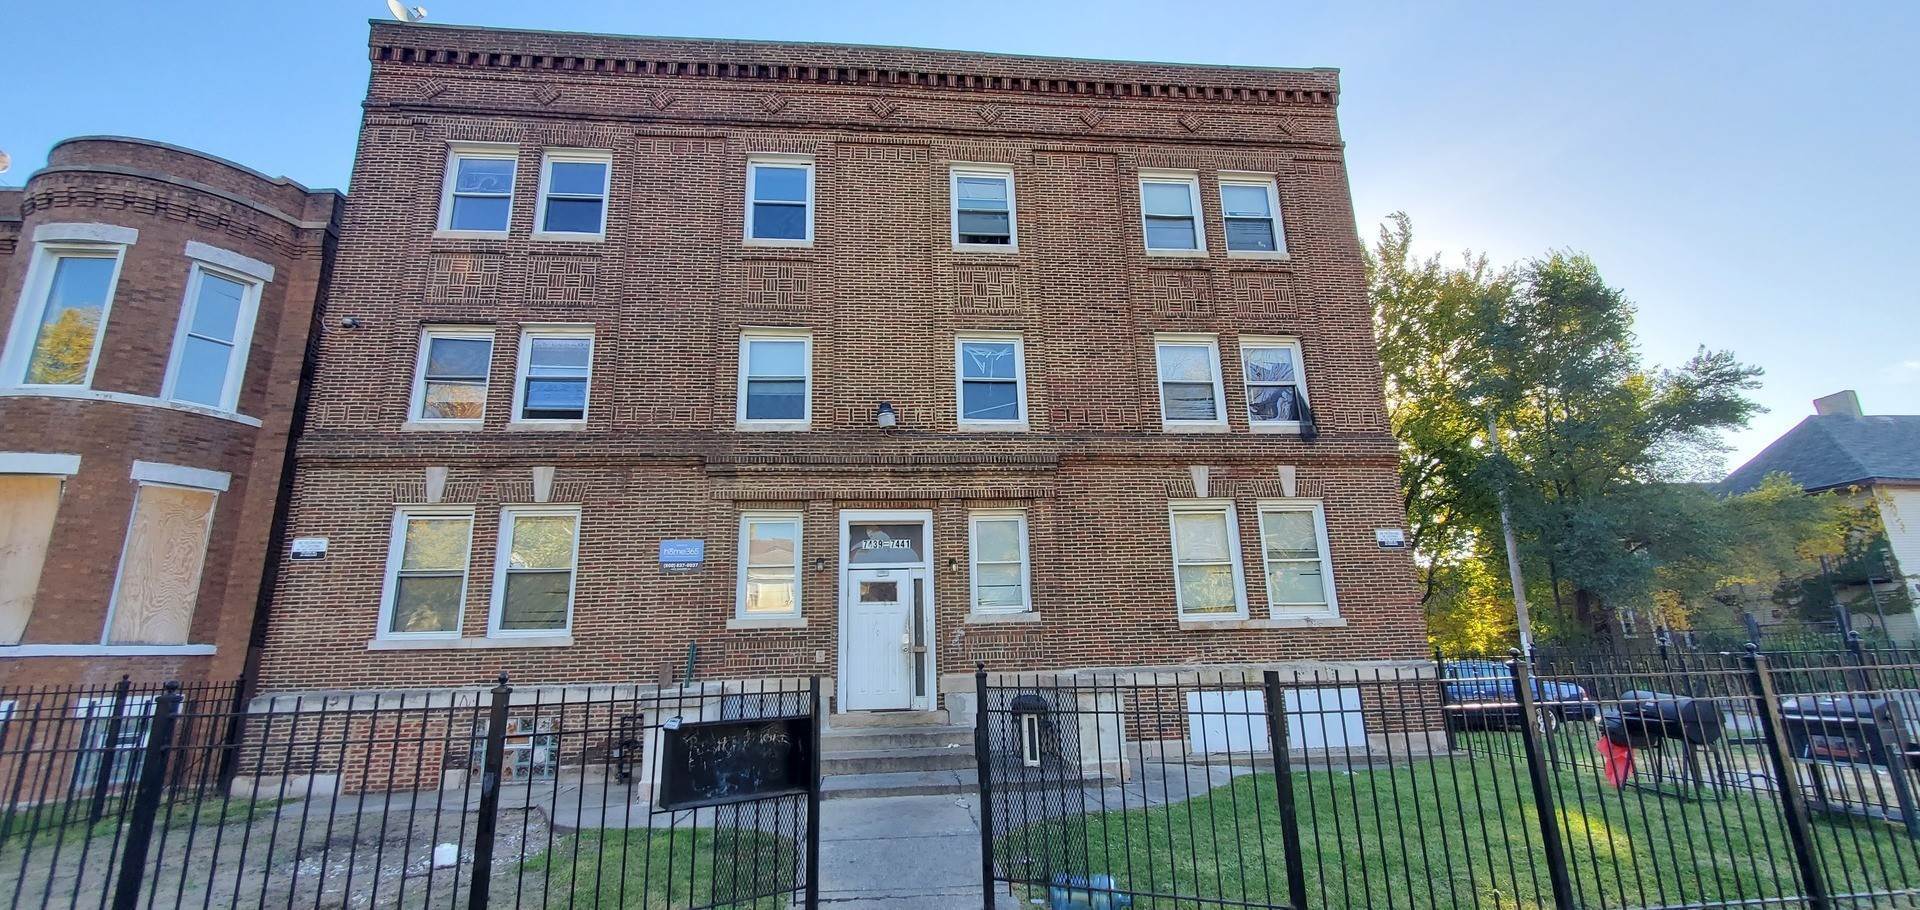 Single Family at Greater Grand Crossing, Chicago, IL 60621